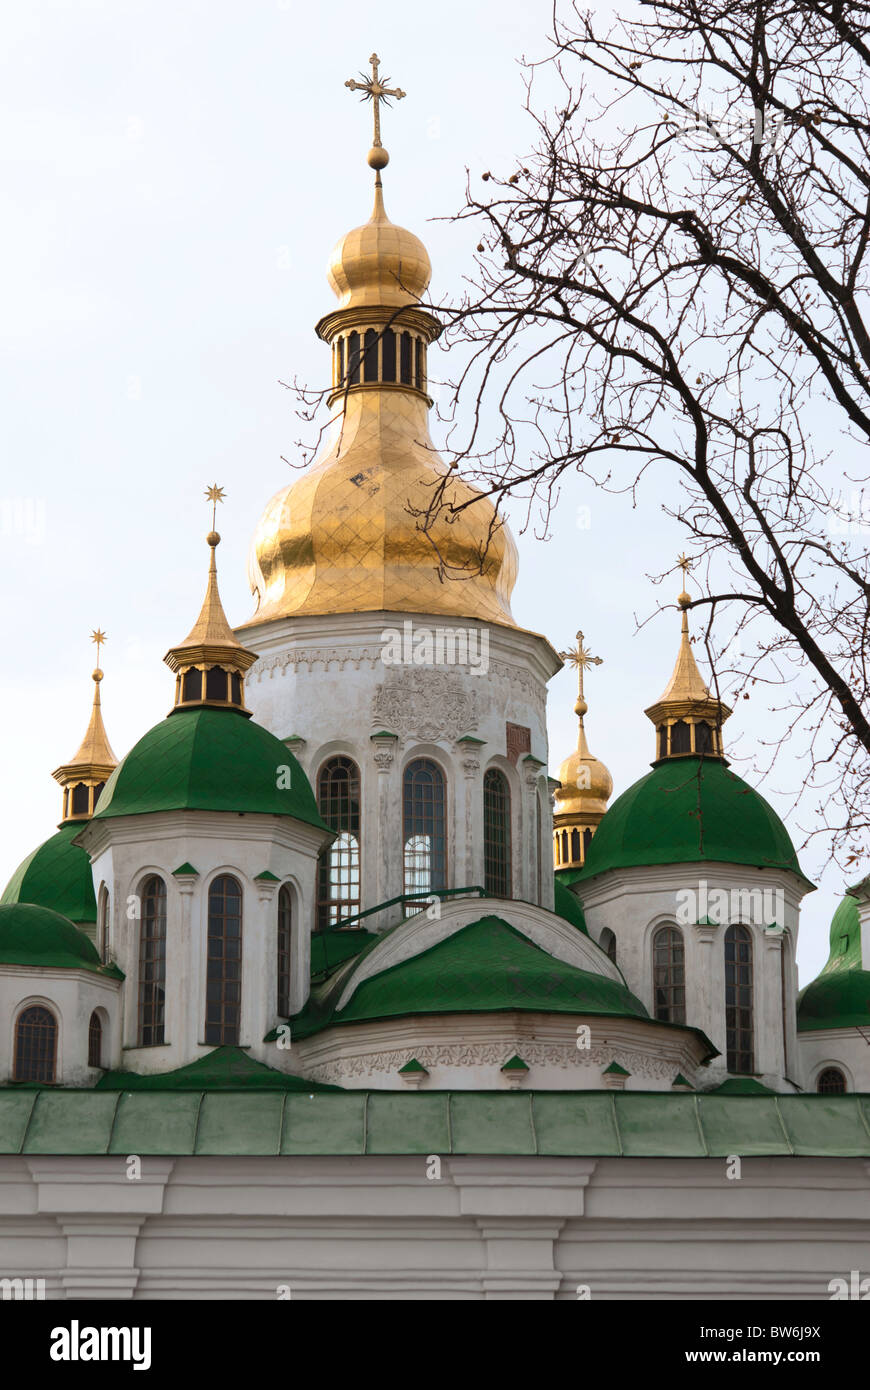 St. Sophia cathedral in Kyiv Stock Photo